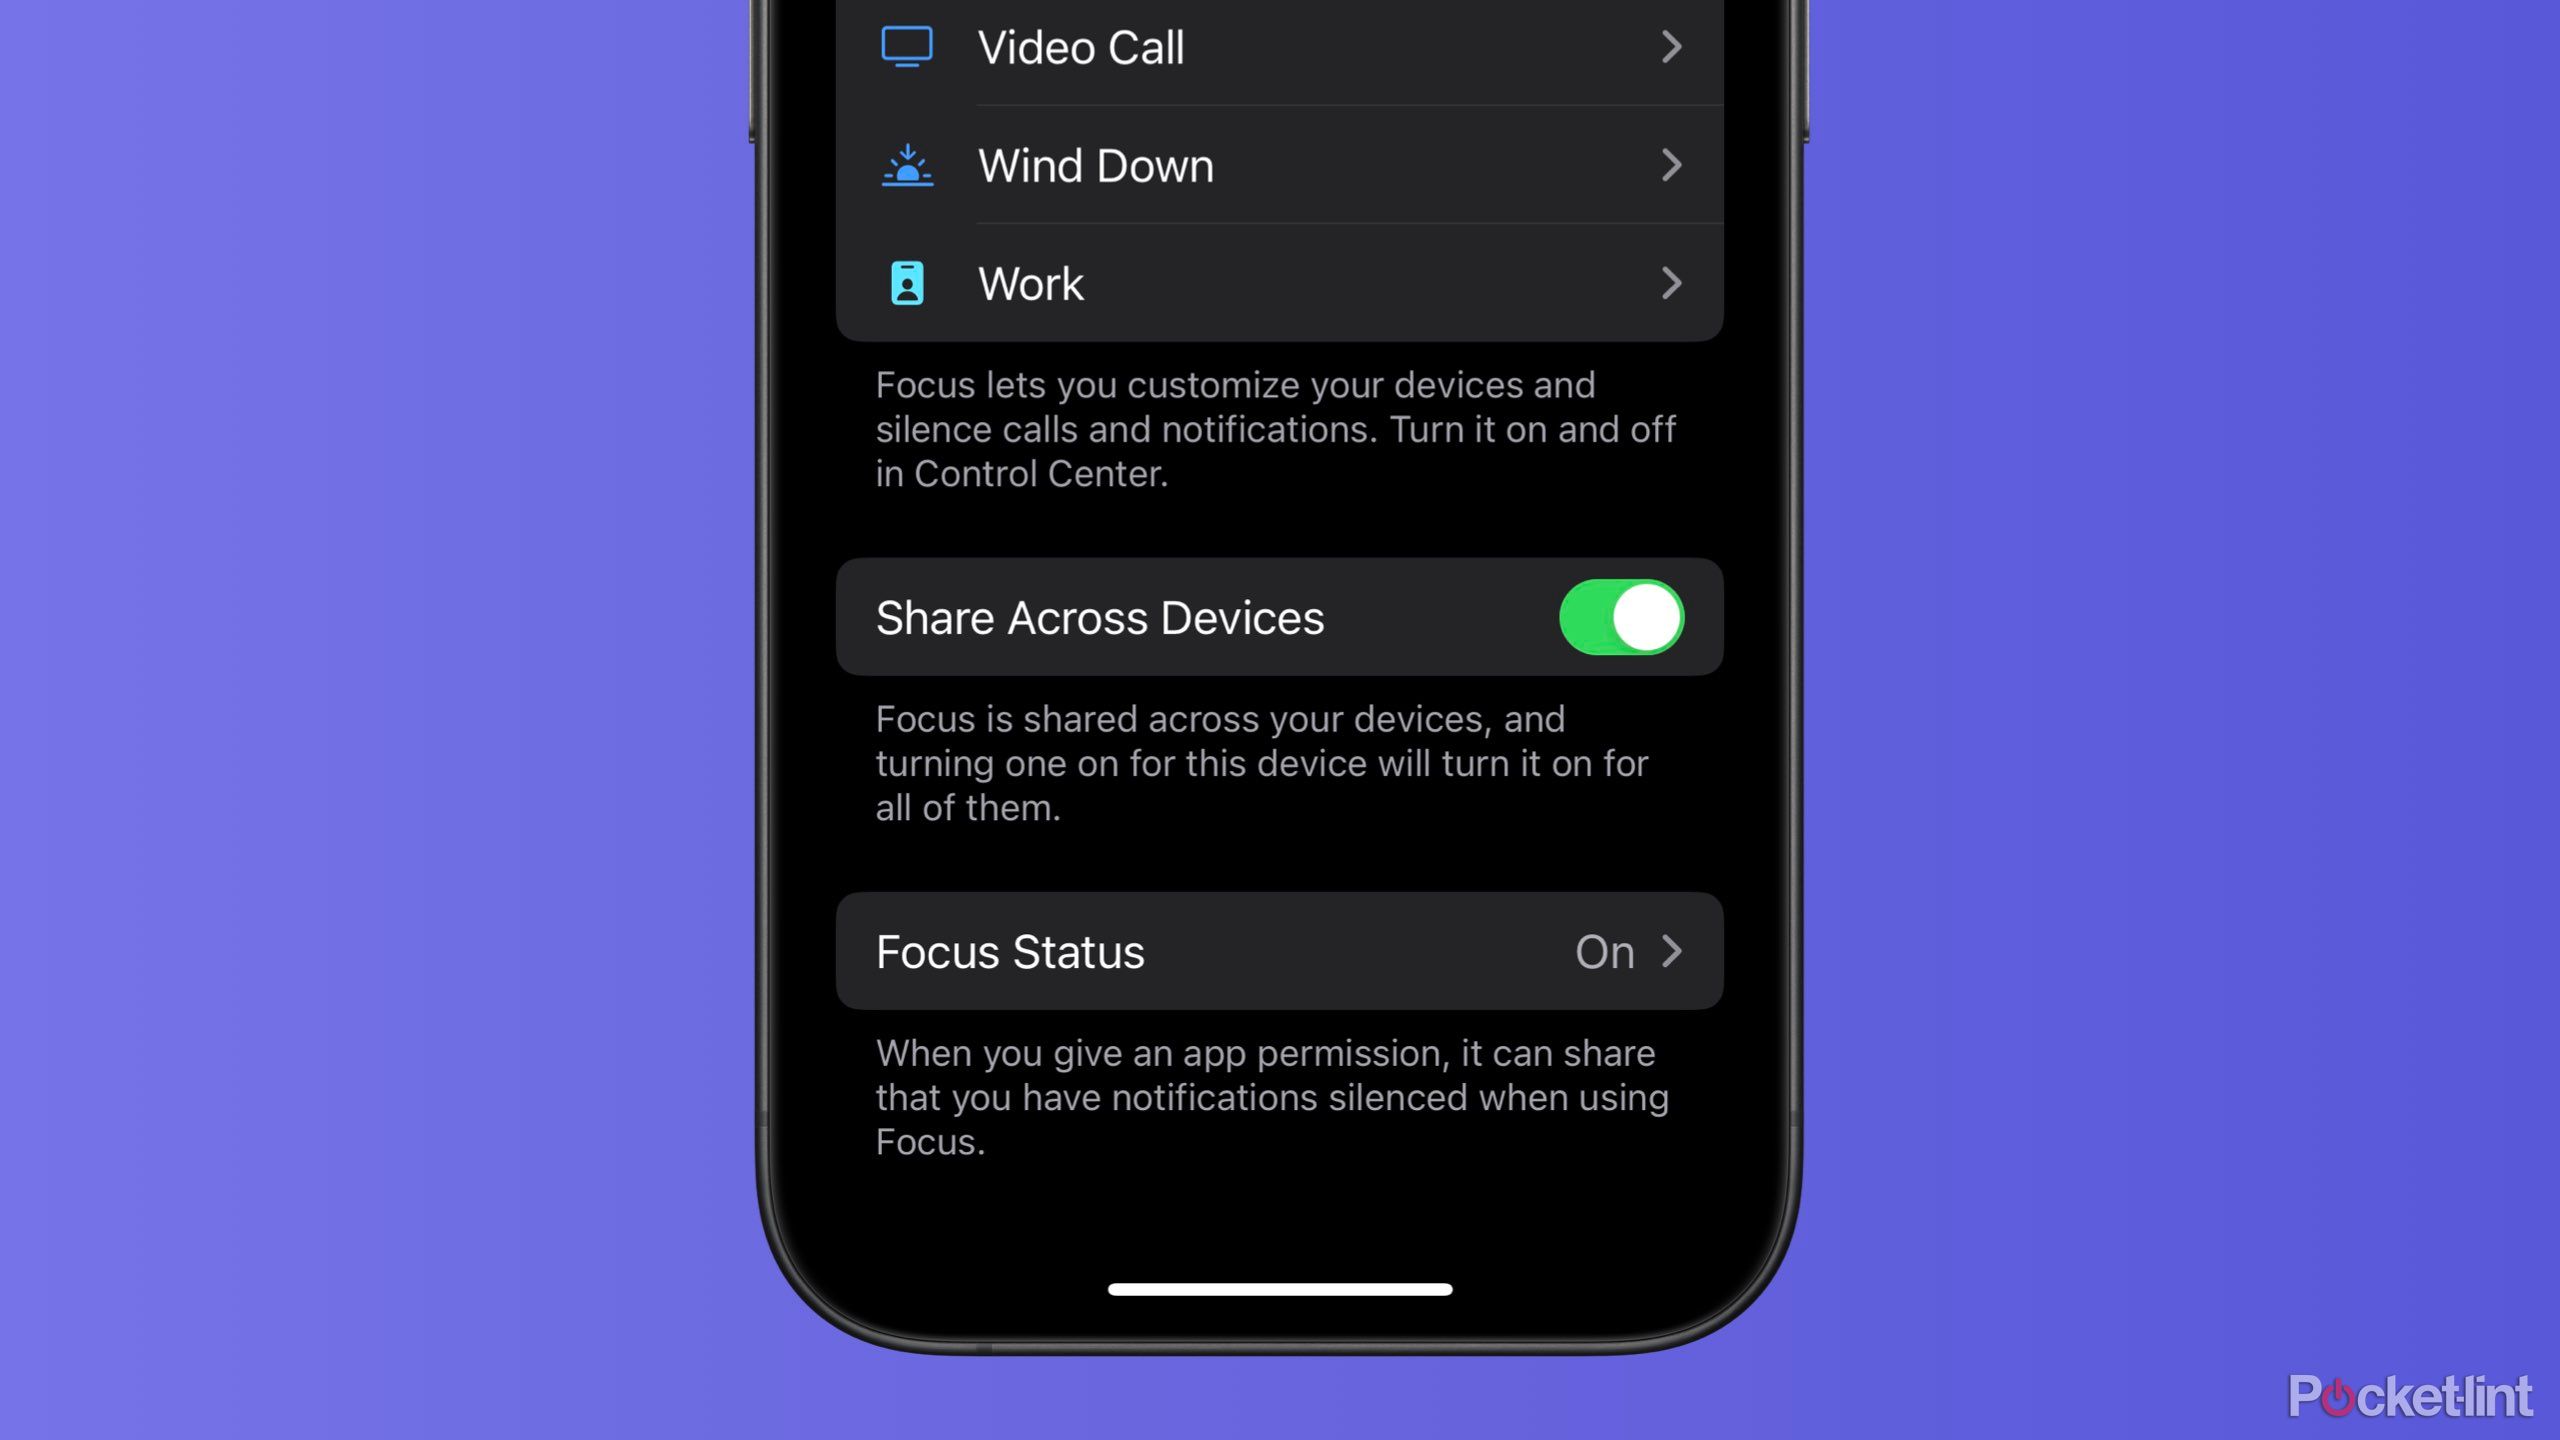 Share Across Devices and Focus Status on iOS